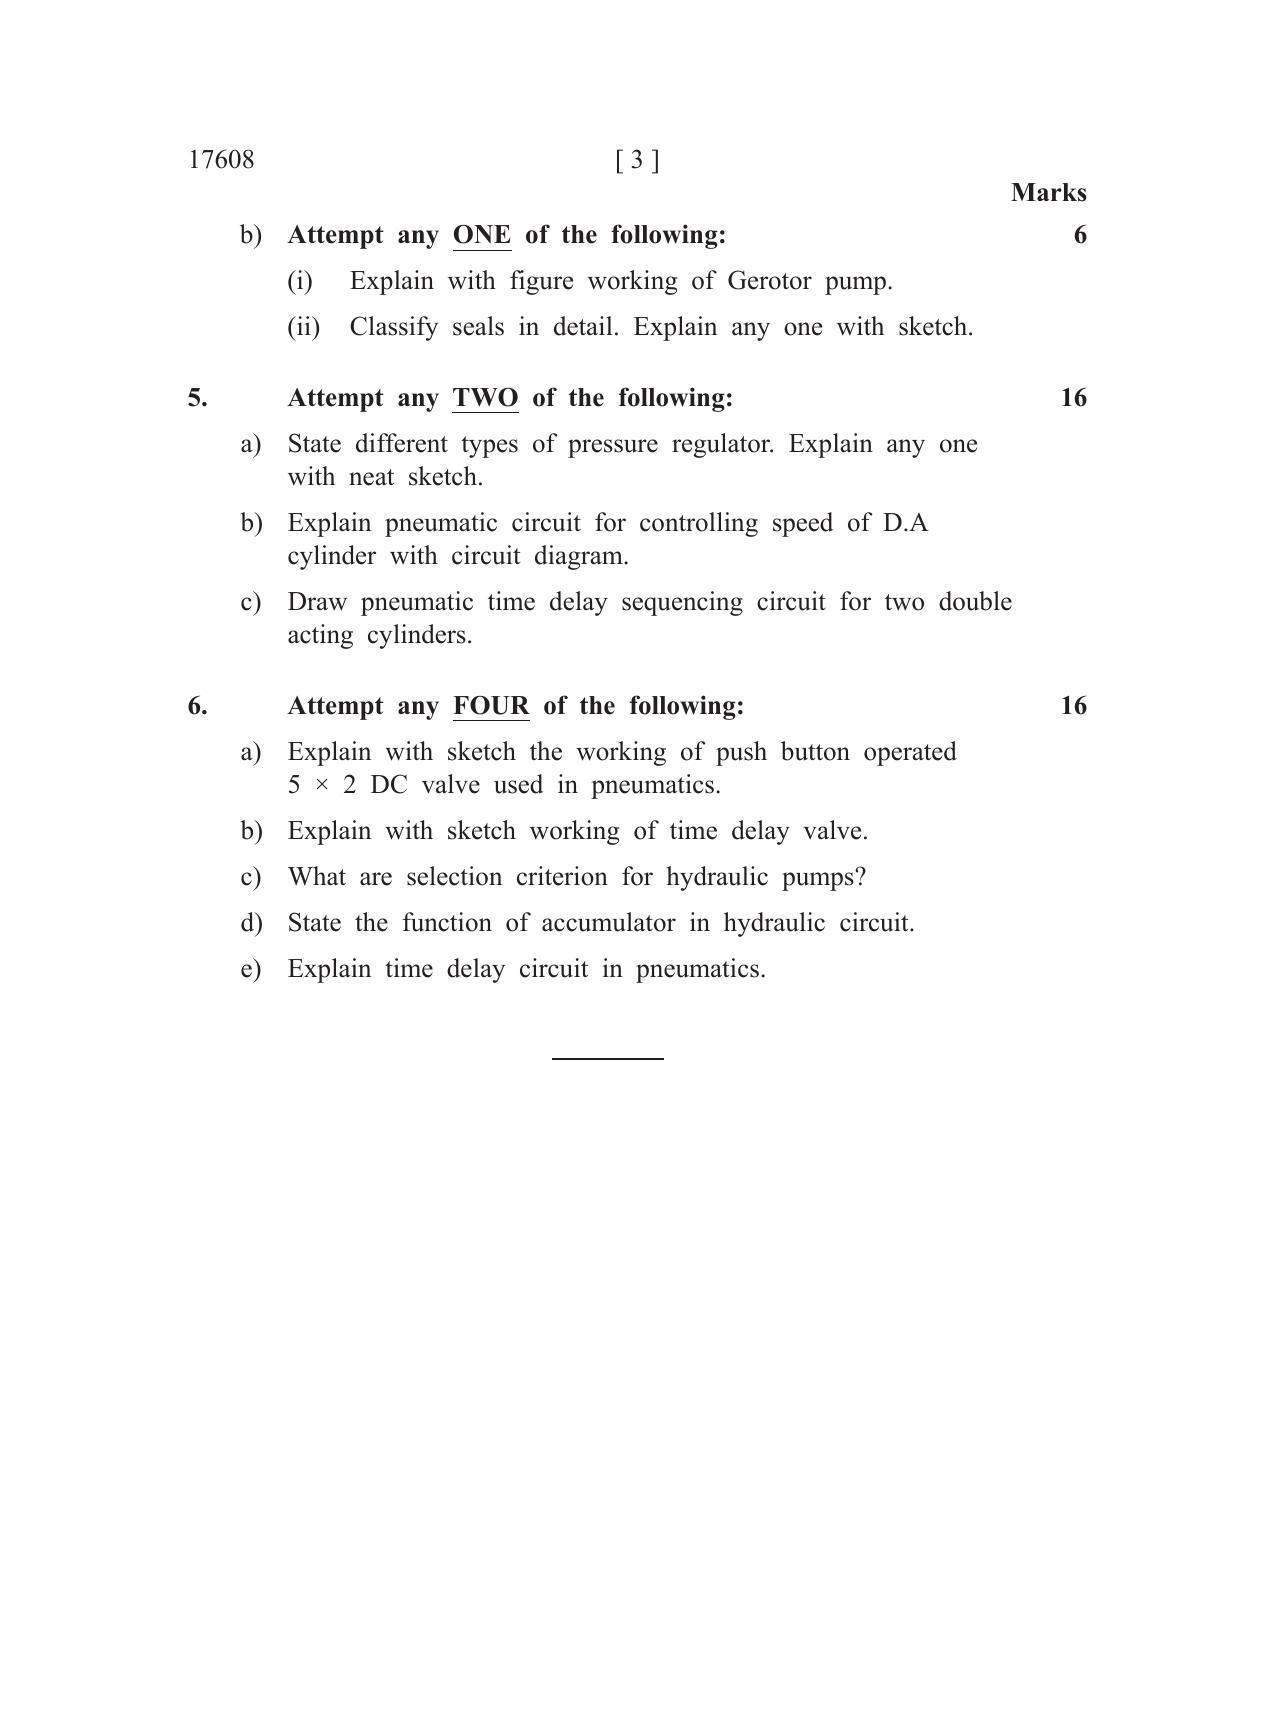 MSBTE Summer Question Paper 2019 - Industrial Fluid Power - Page 3